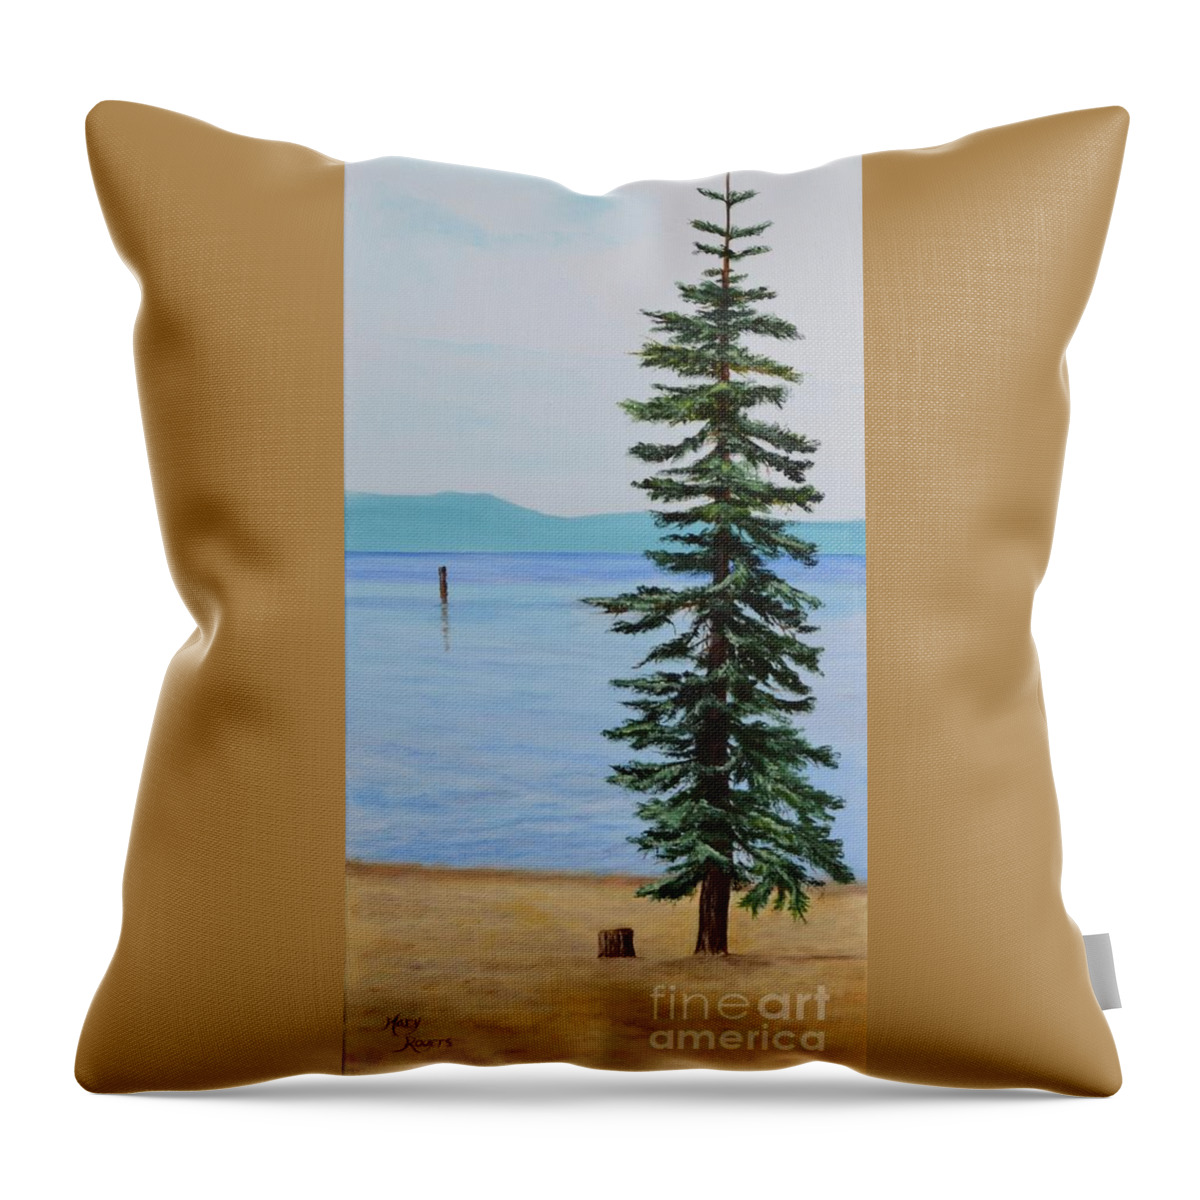 California Throw Pillow featuring the painting South Lake Tahoe by Mary Rogers